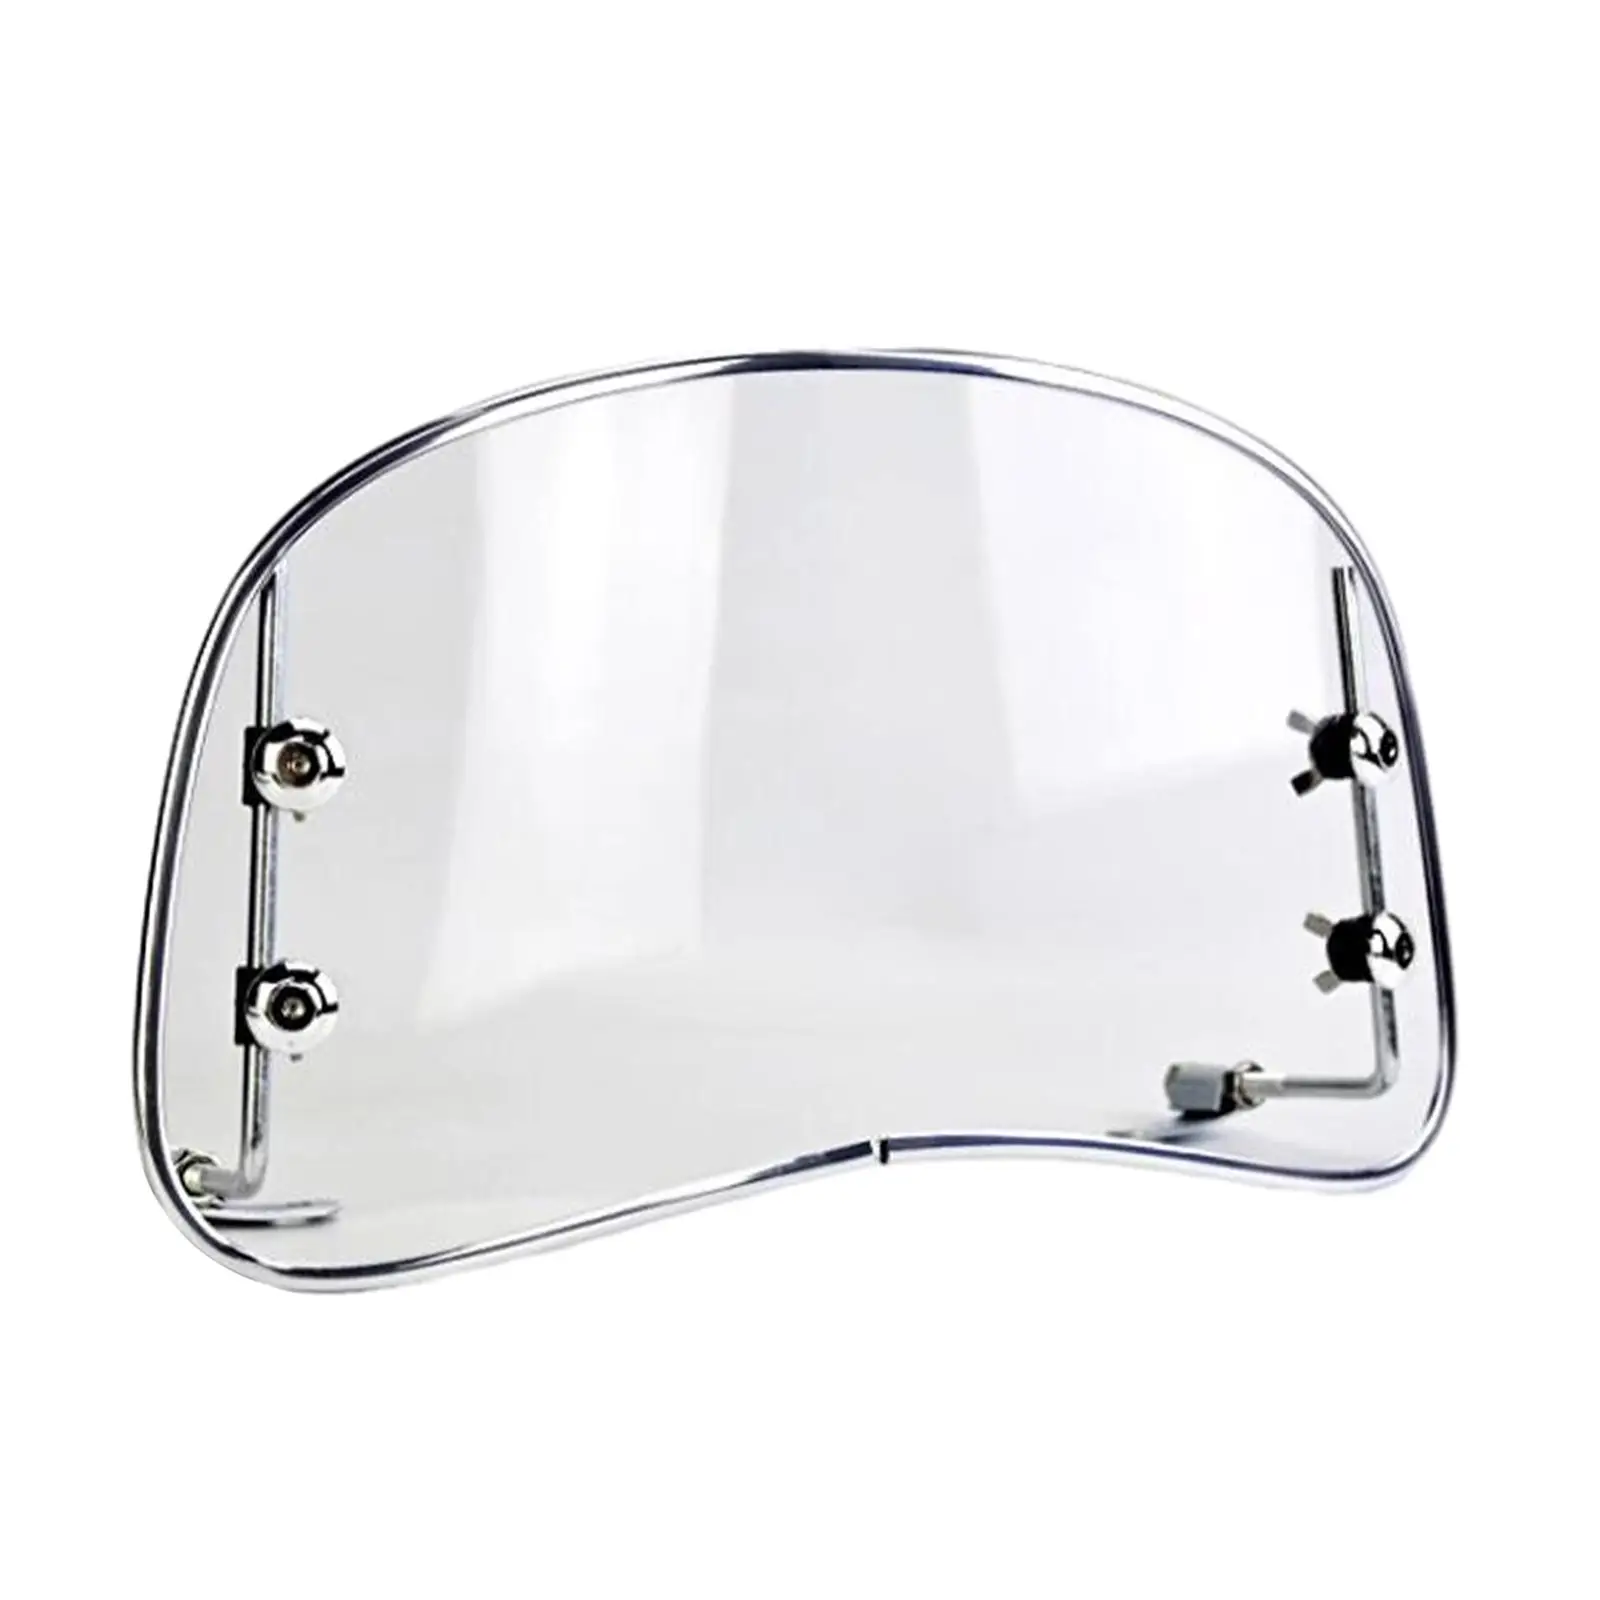 Motorbike Windshield Clear Front Screen Accessories 8.6inch Tall PC Material